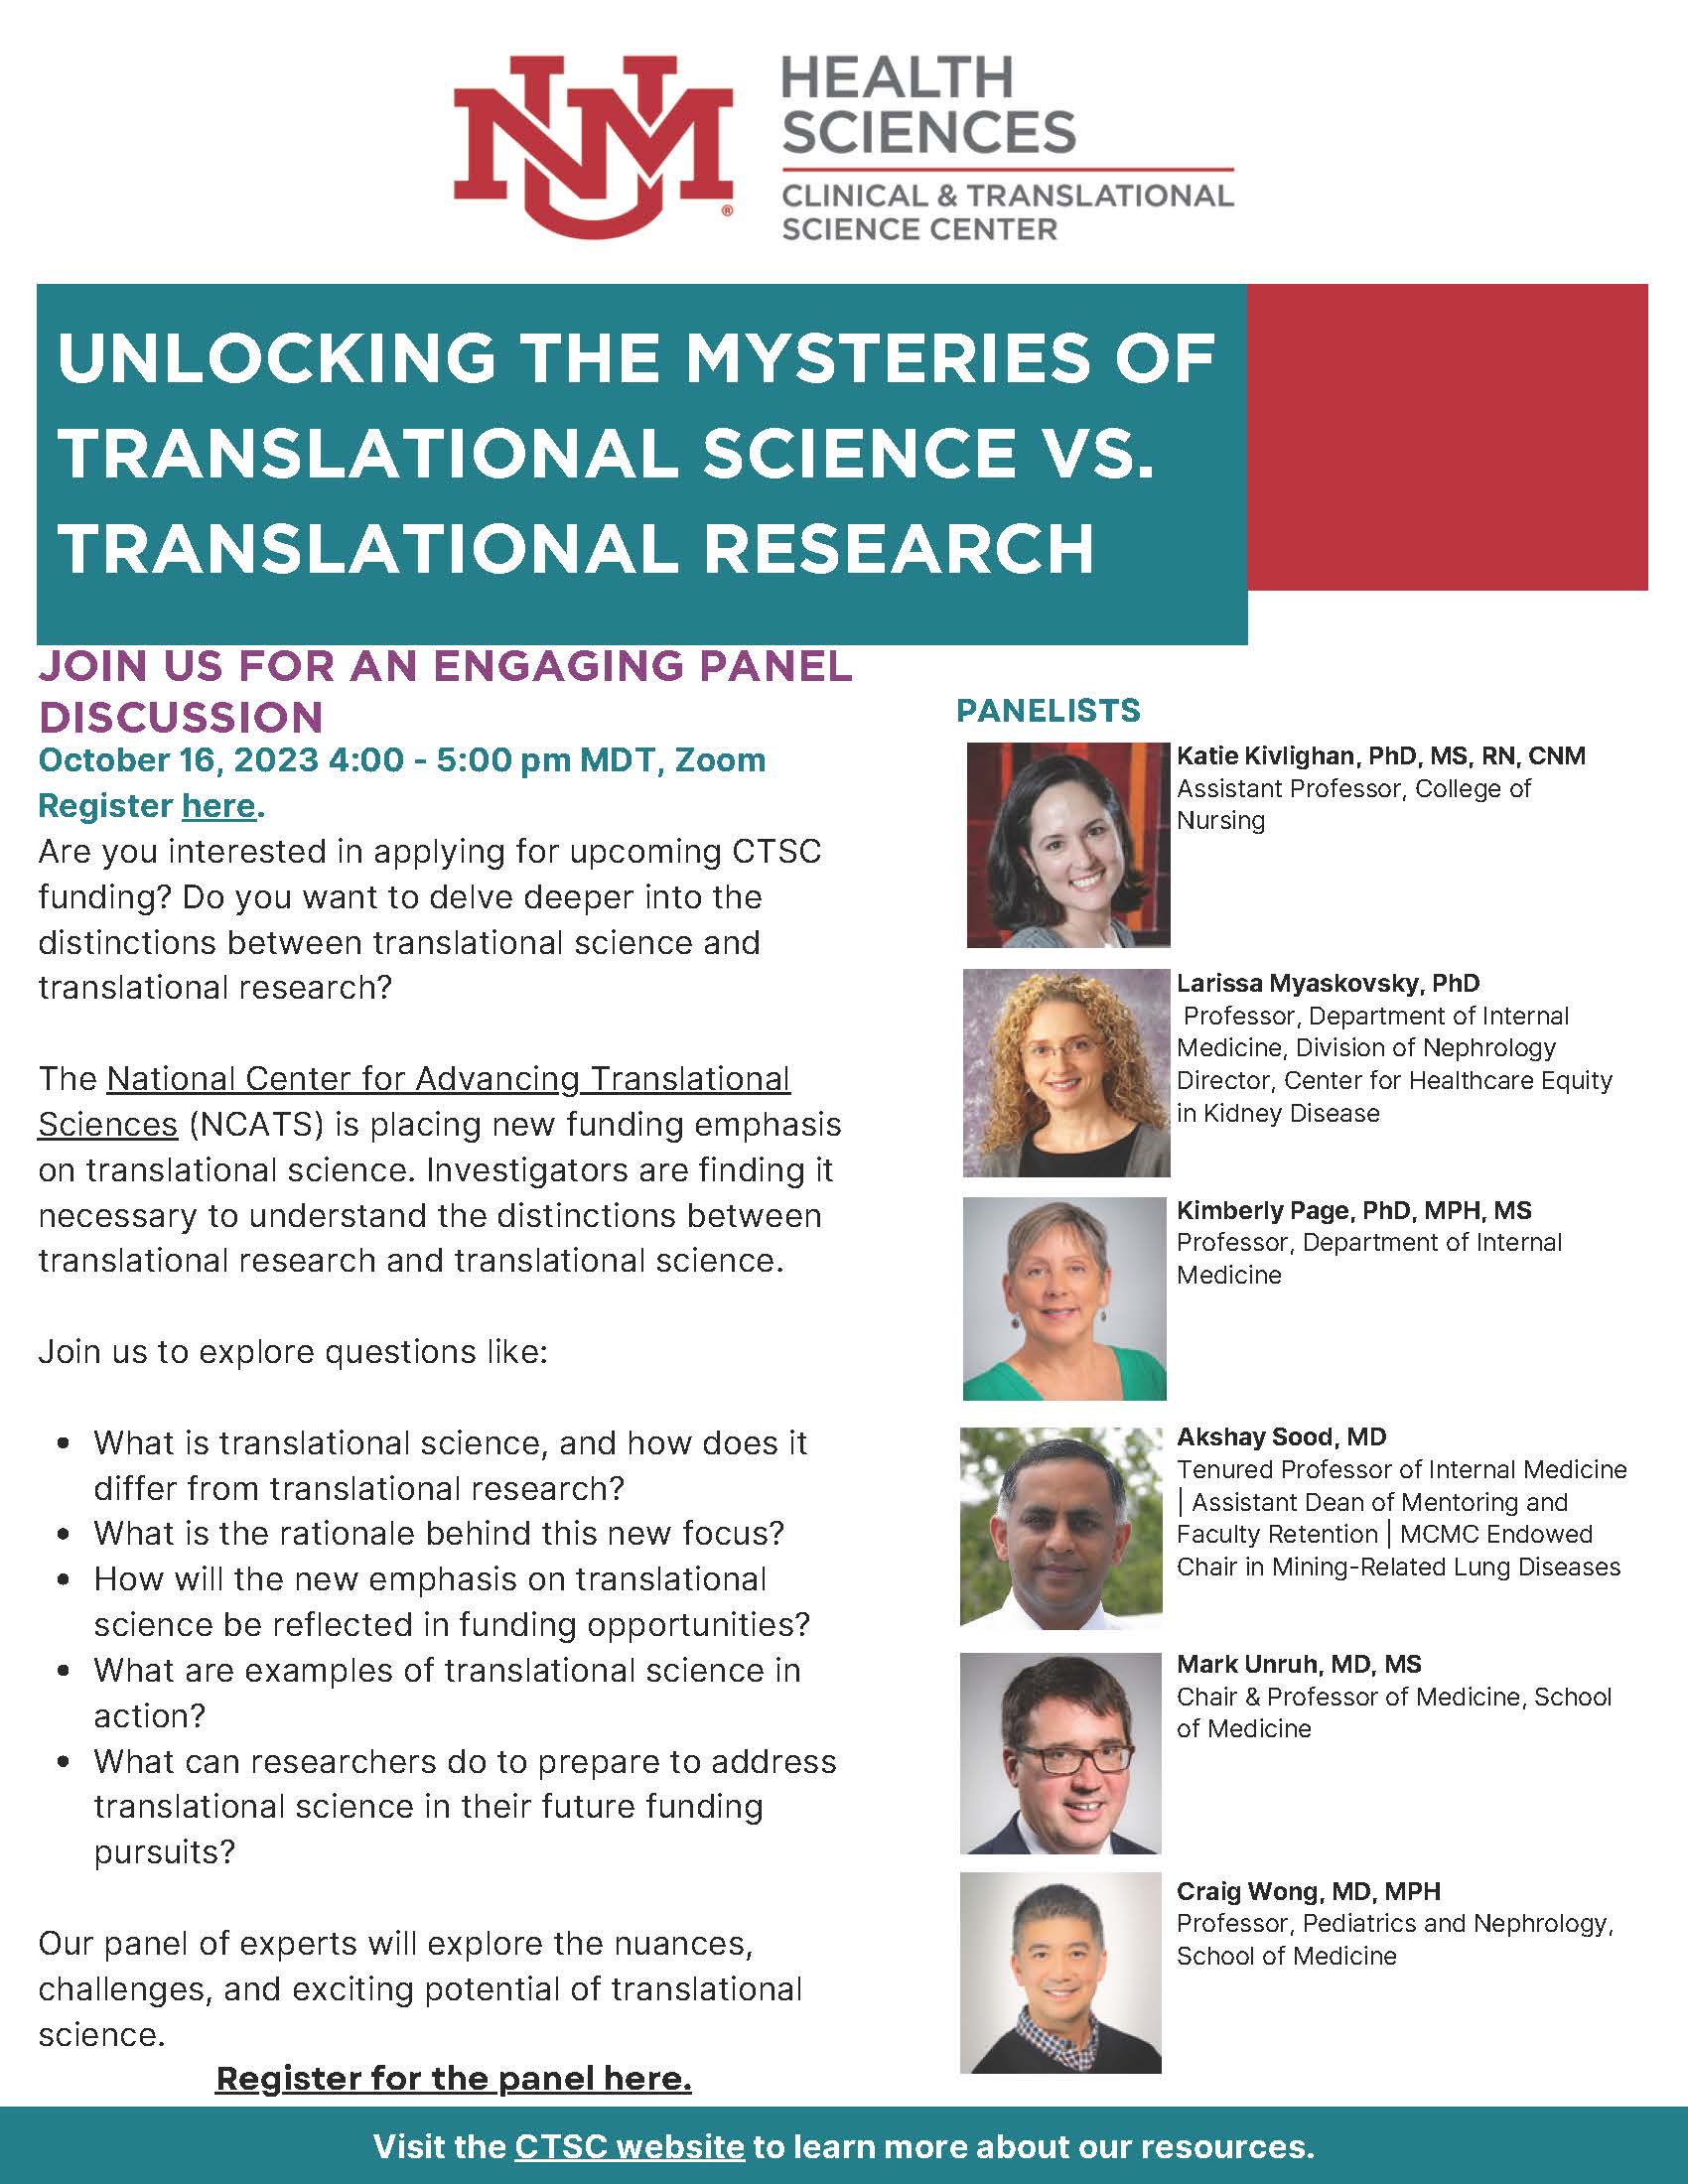 Unlocking the Mysteries of Translational Science vs. Translational Research